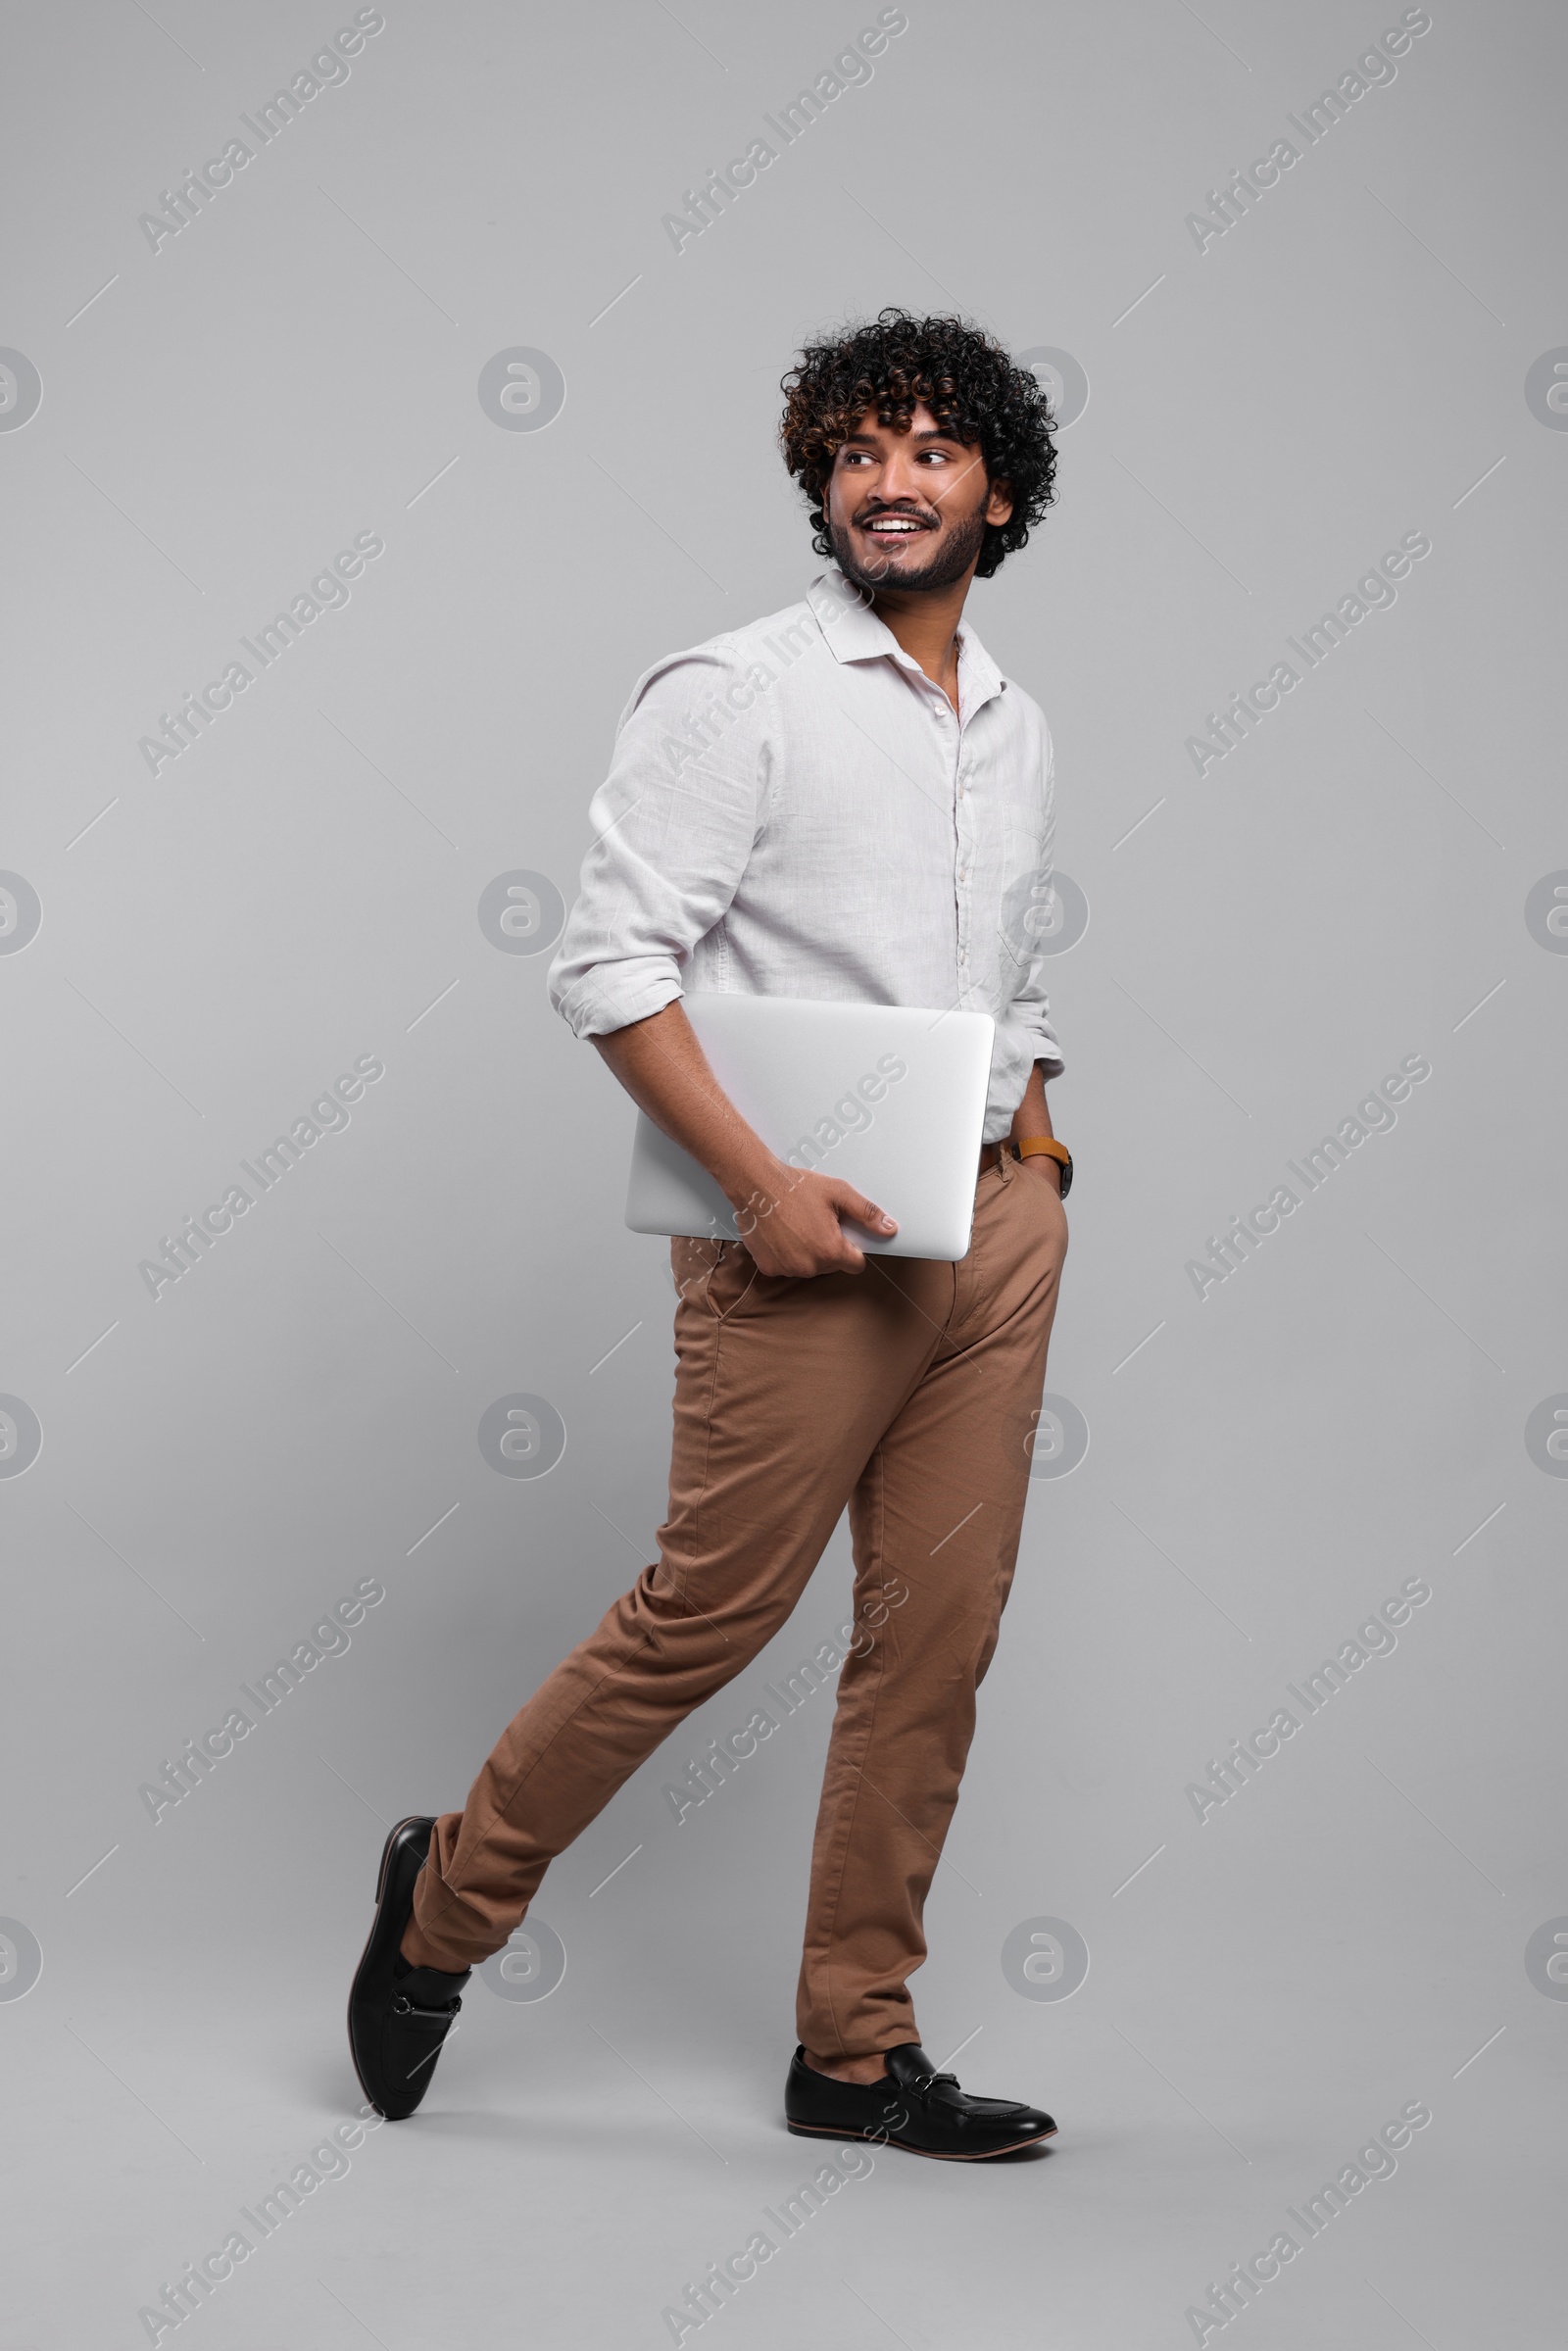 Photo of Smiling man with laptop on light grey background